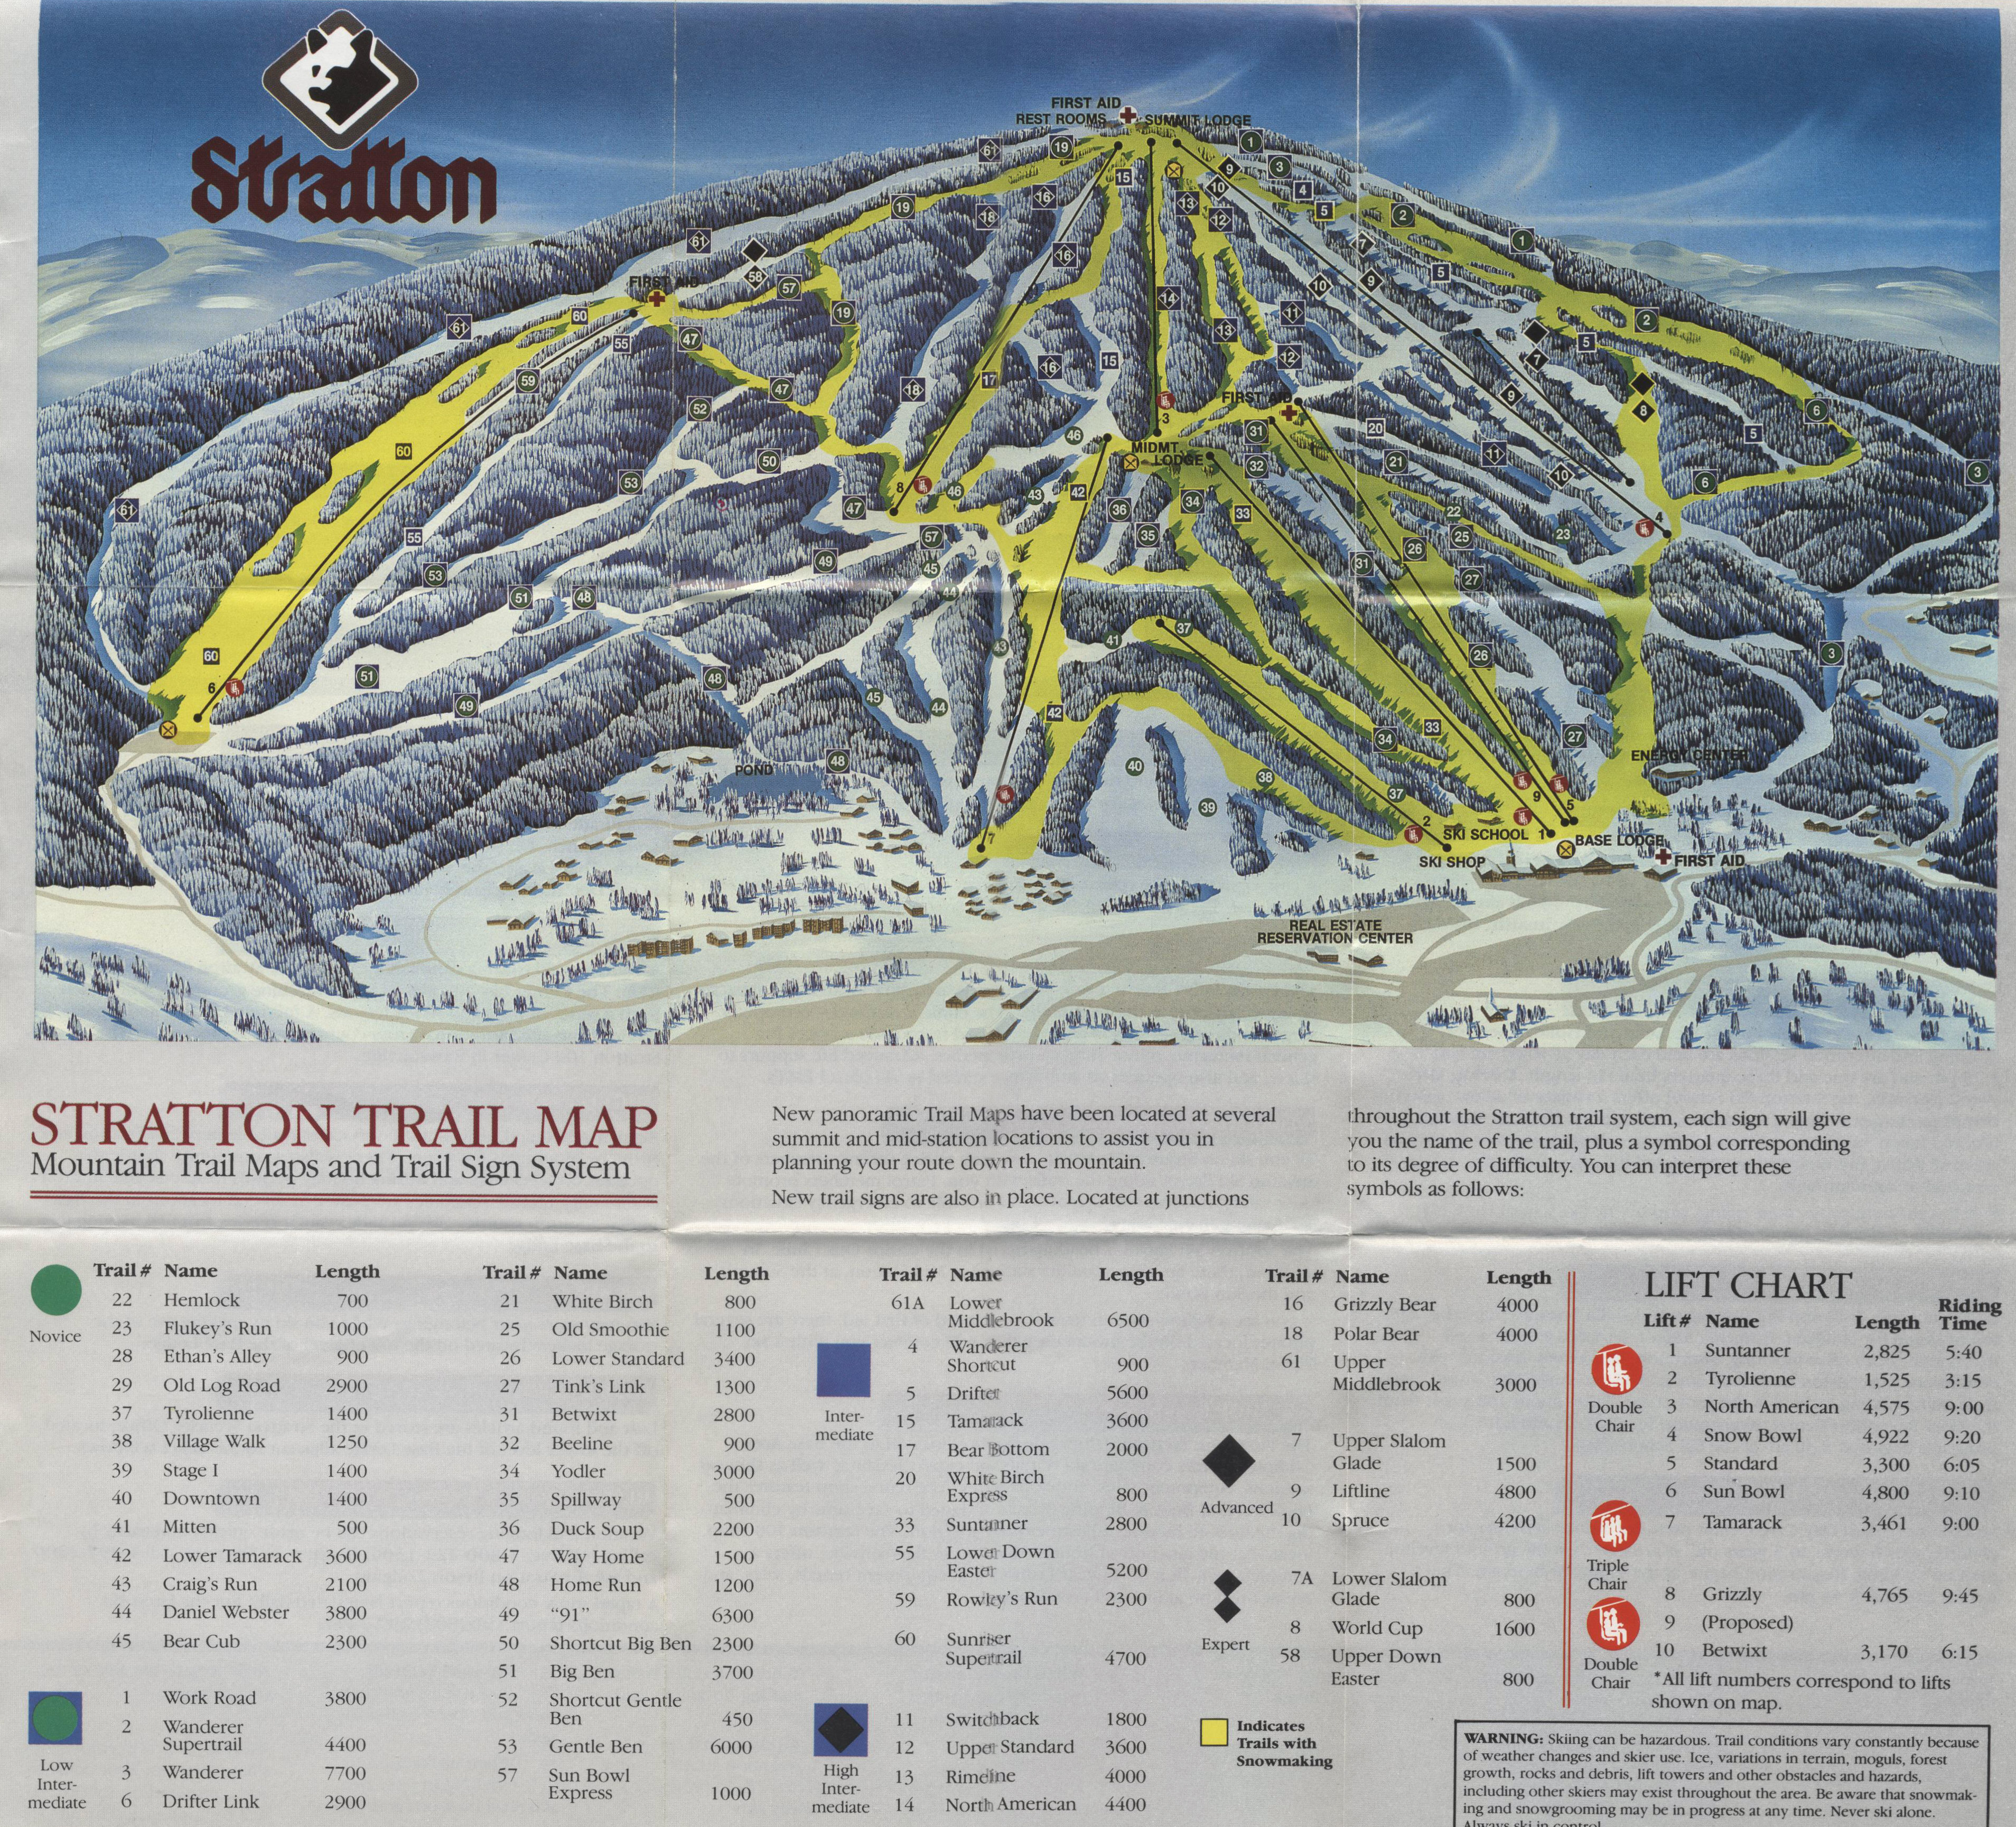 Originally labeled as from 1989, i changed it to 1981 because it's missing many features that were added after 1981 including the betwixt double and all of the quad chairlifts